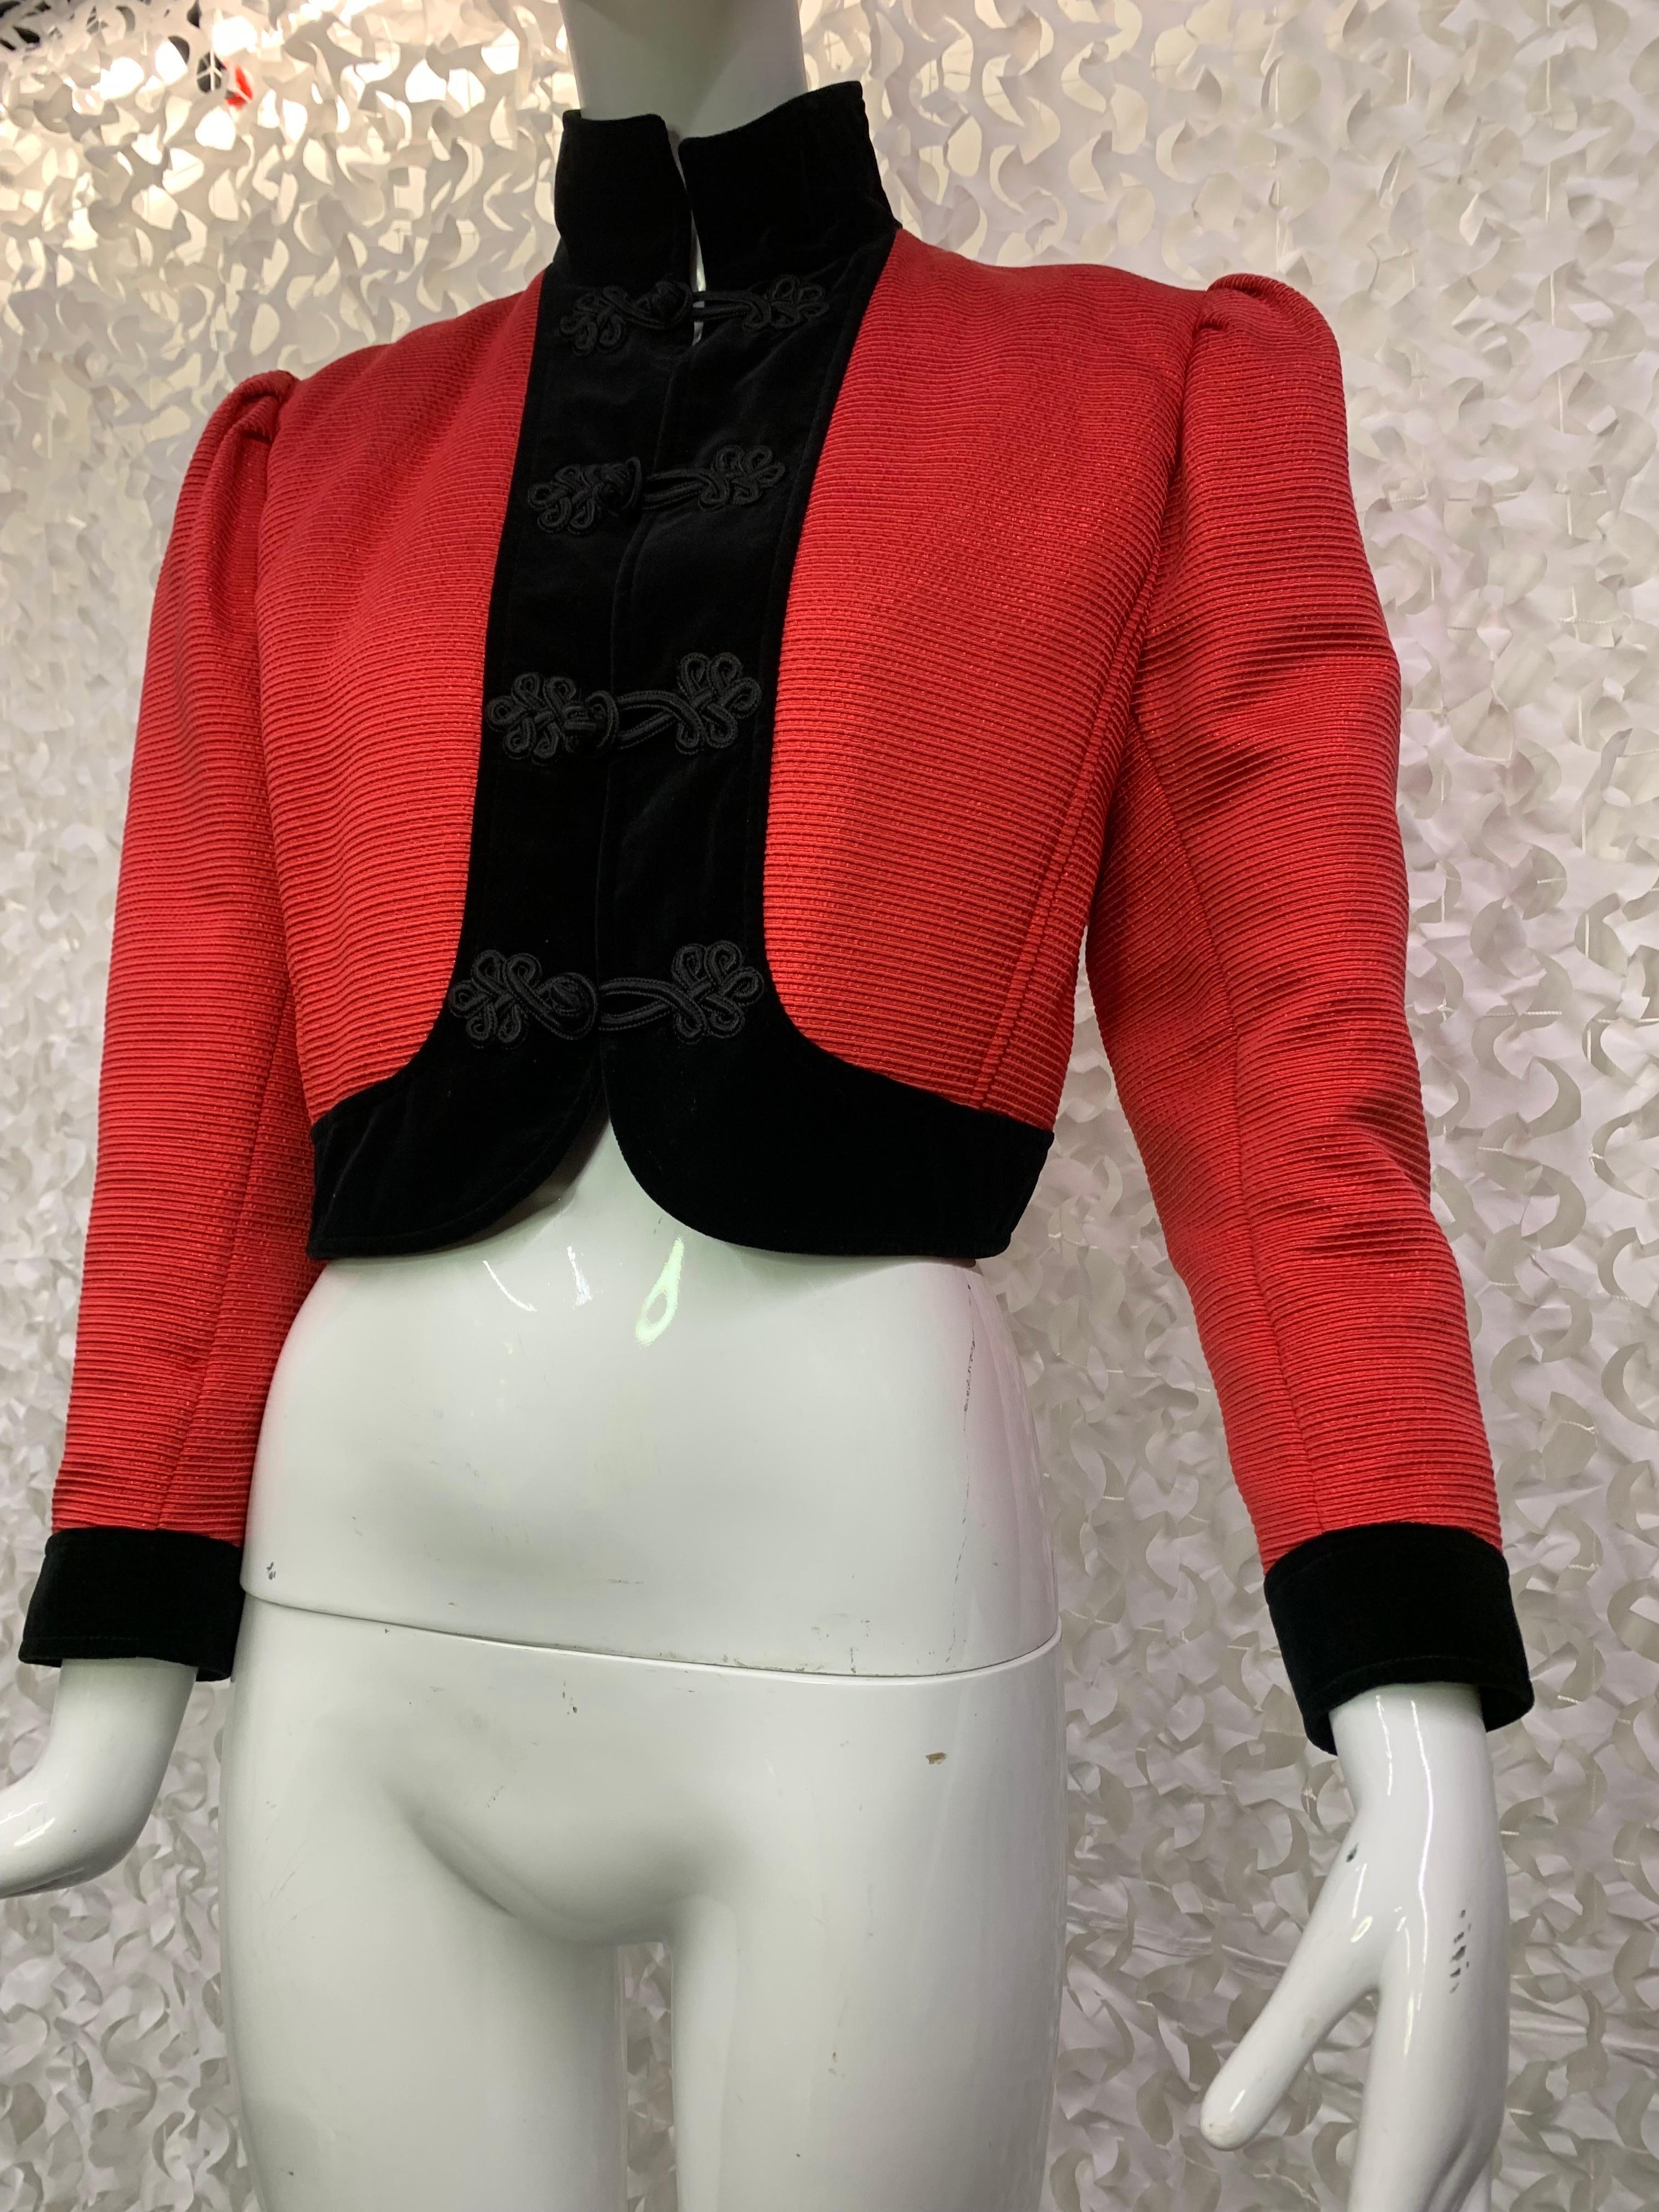 1980s Ungaro Red Silk Faille Bolero Jacket w Black Velvet Trim & High Collar:  Front frog closures and pleated puff shoulders. Tapered sleeves with  banded cuffs. Size US 4-6. 